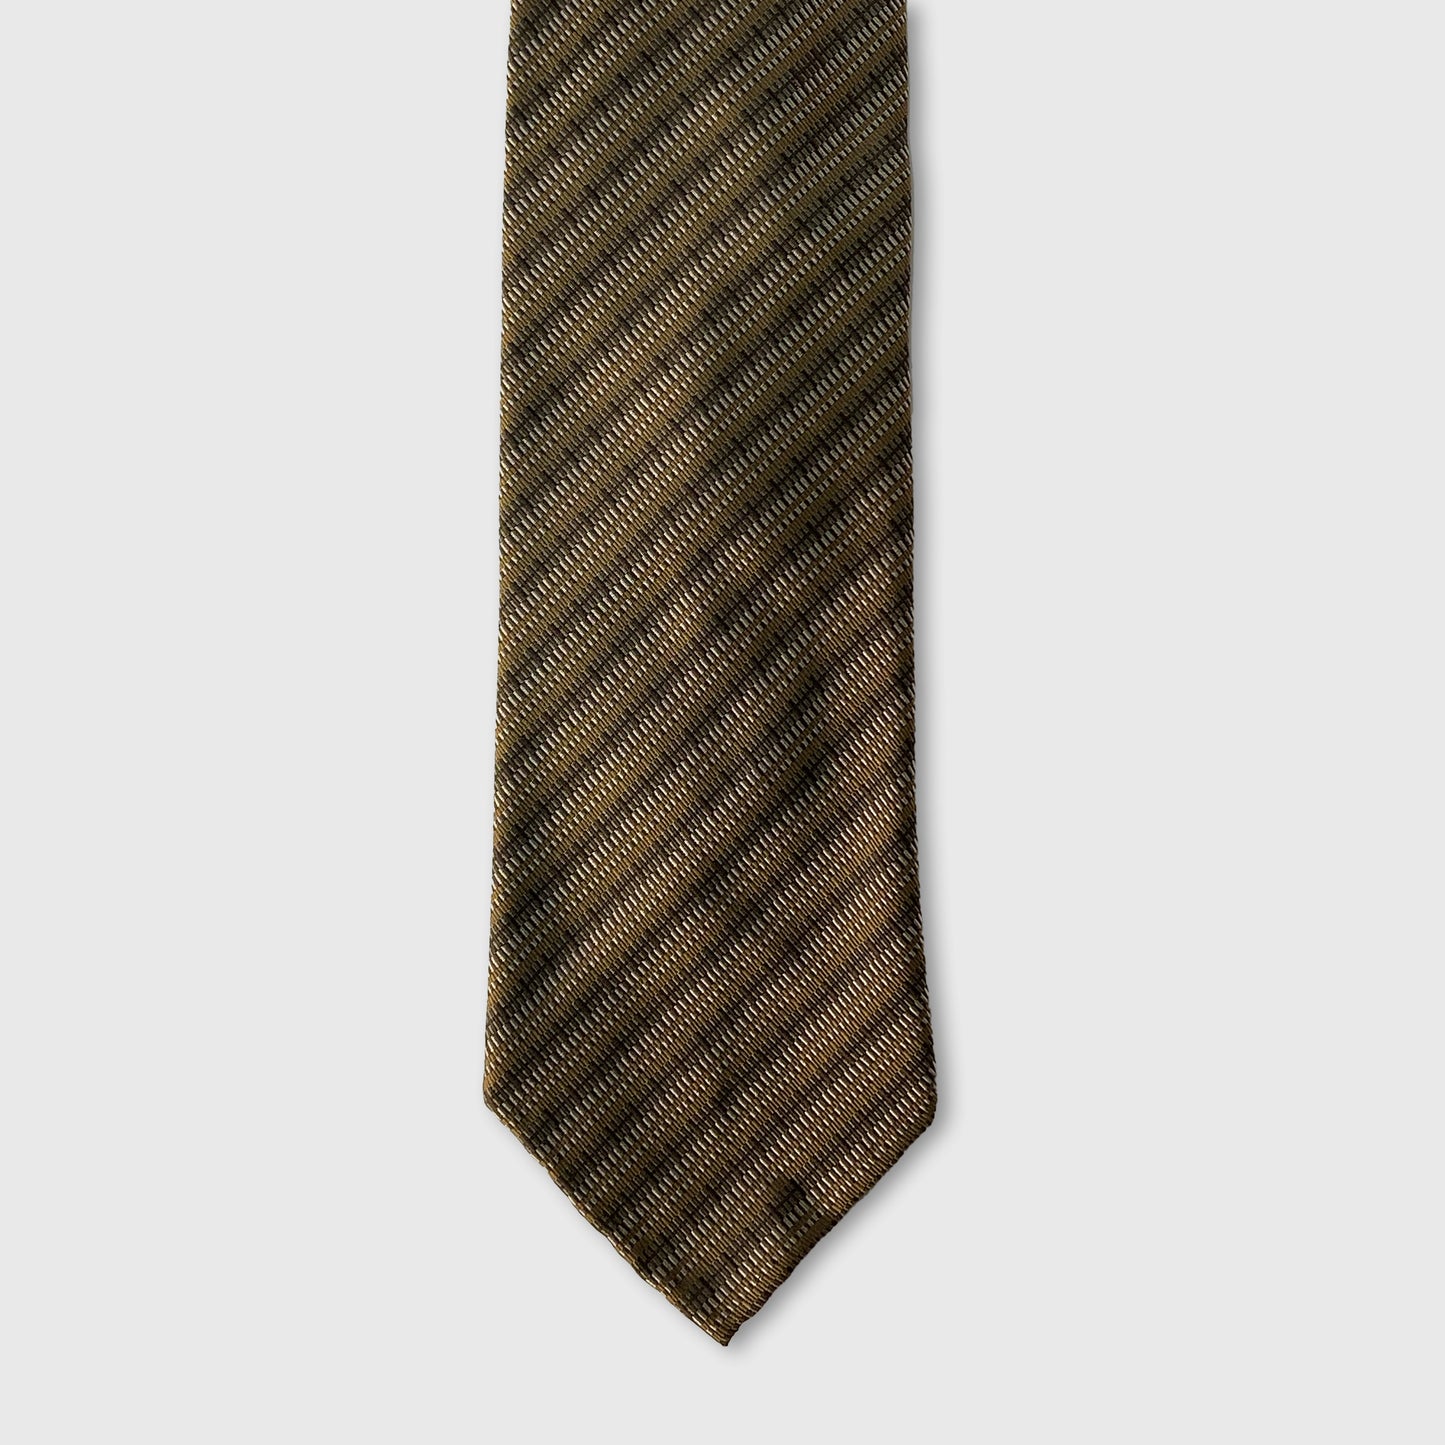 Dark Brown and Light Brown Woven Striped Tie